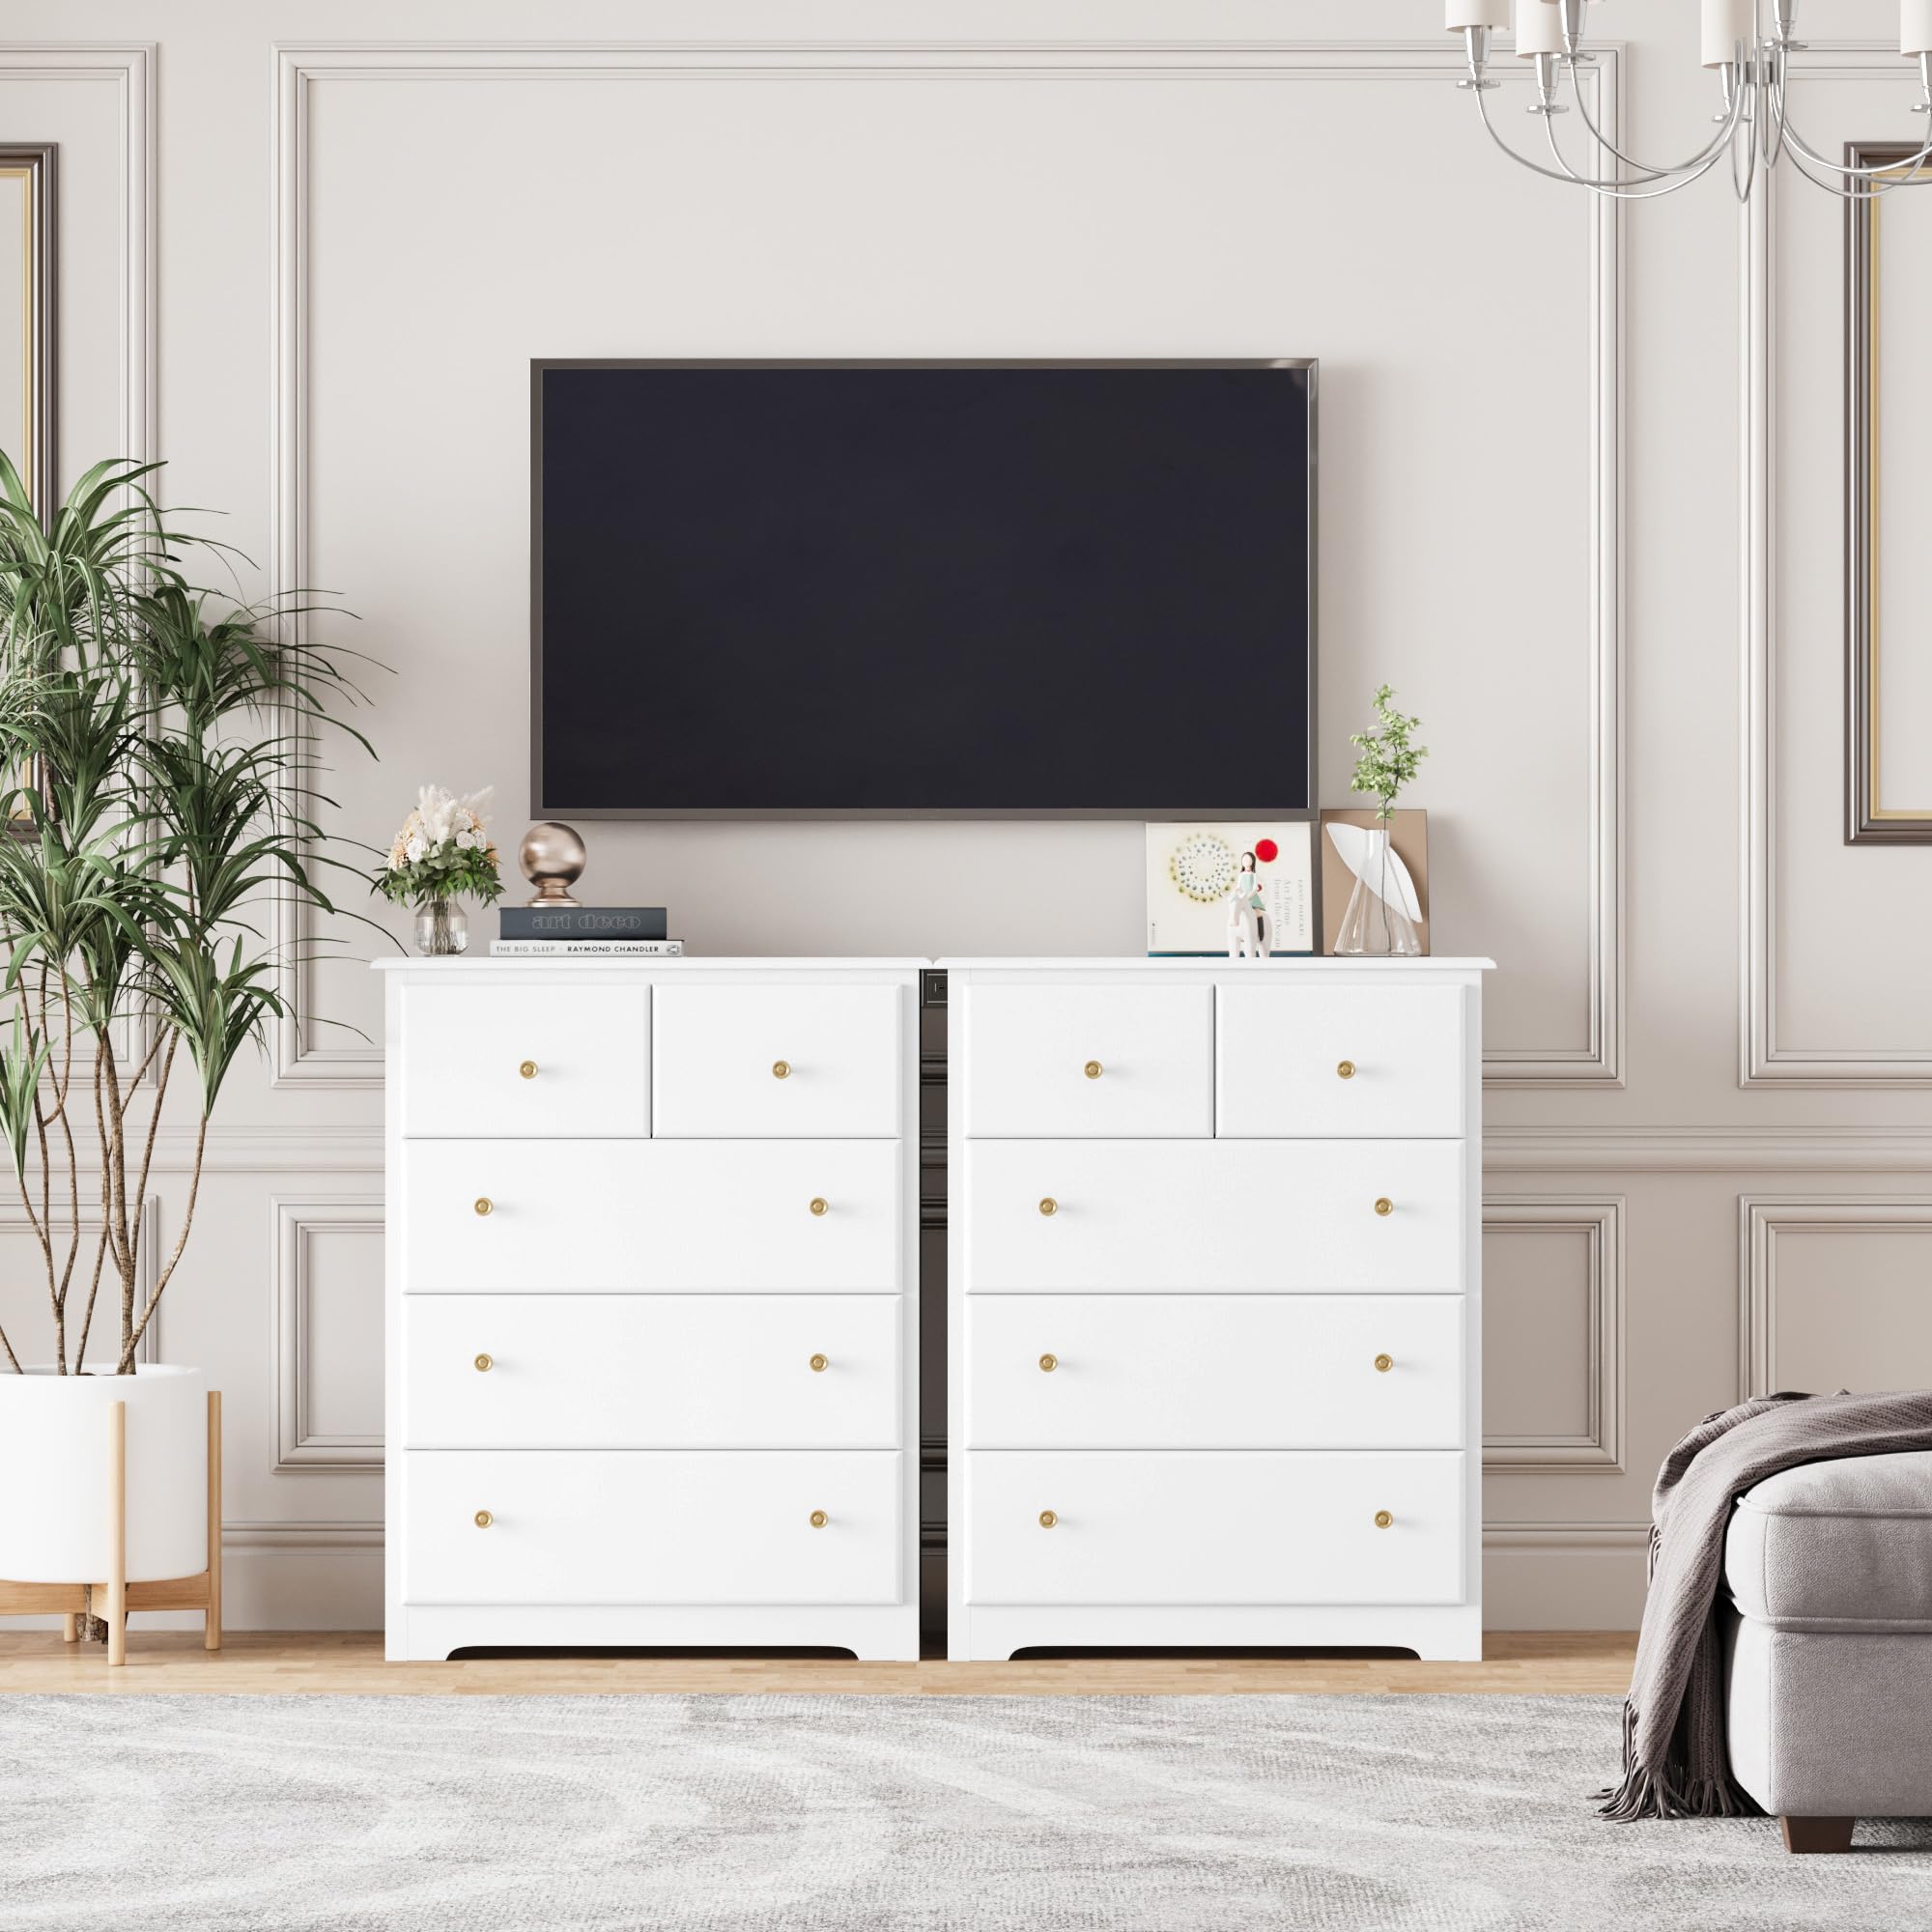 HOUSUIT Dresser with 5 Drawers, Tall Dresser Chest of Drawers, 5 Drawer Dresser with Deep Space, Wood Dresser Storage Cabinet for Living Room, Hallway, Entryway, Office, White